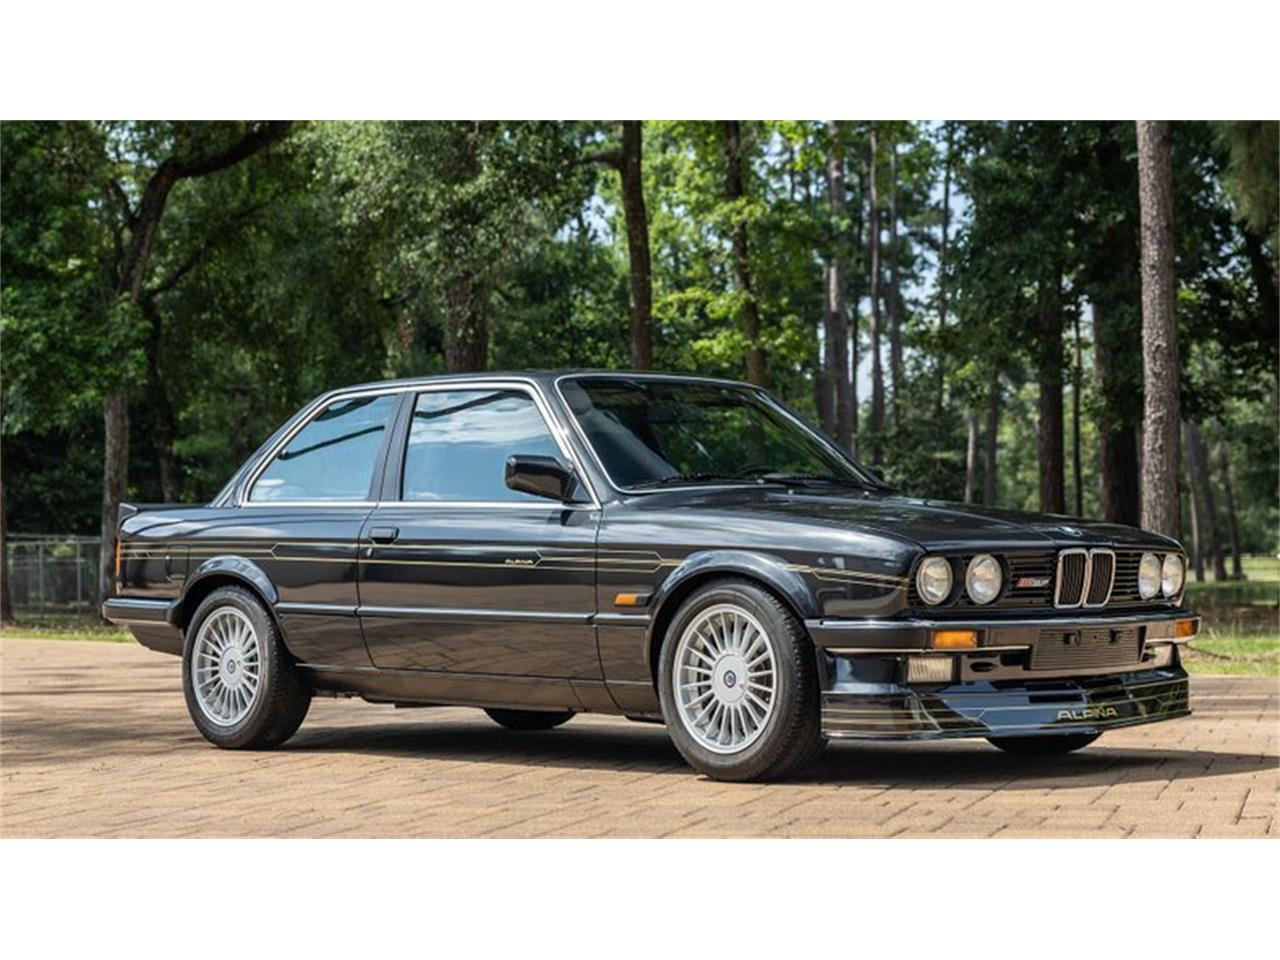 For Sale at Auction: 1986 BMW Alpina in Monterey, California for sale in Monterey, CA